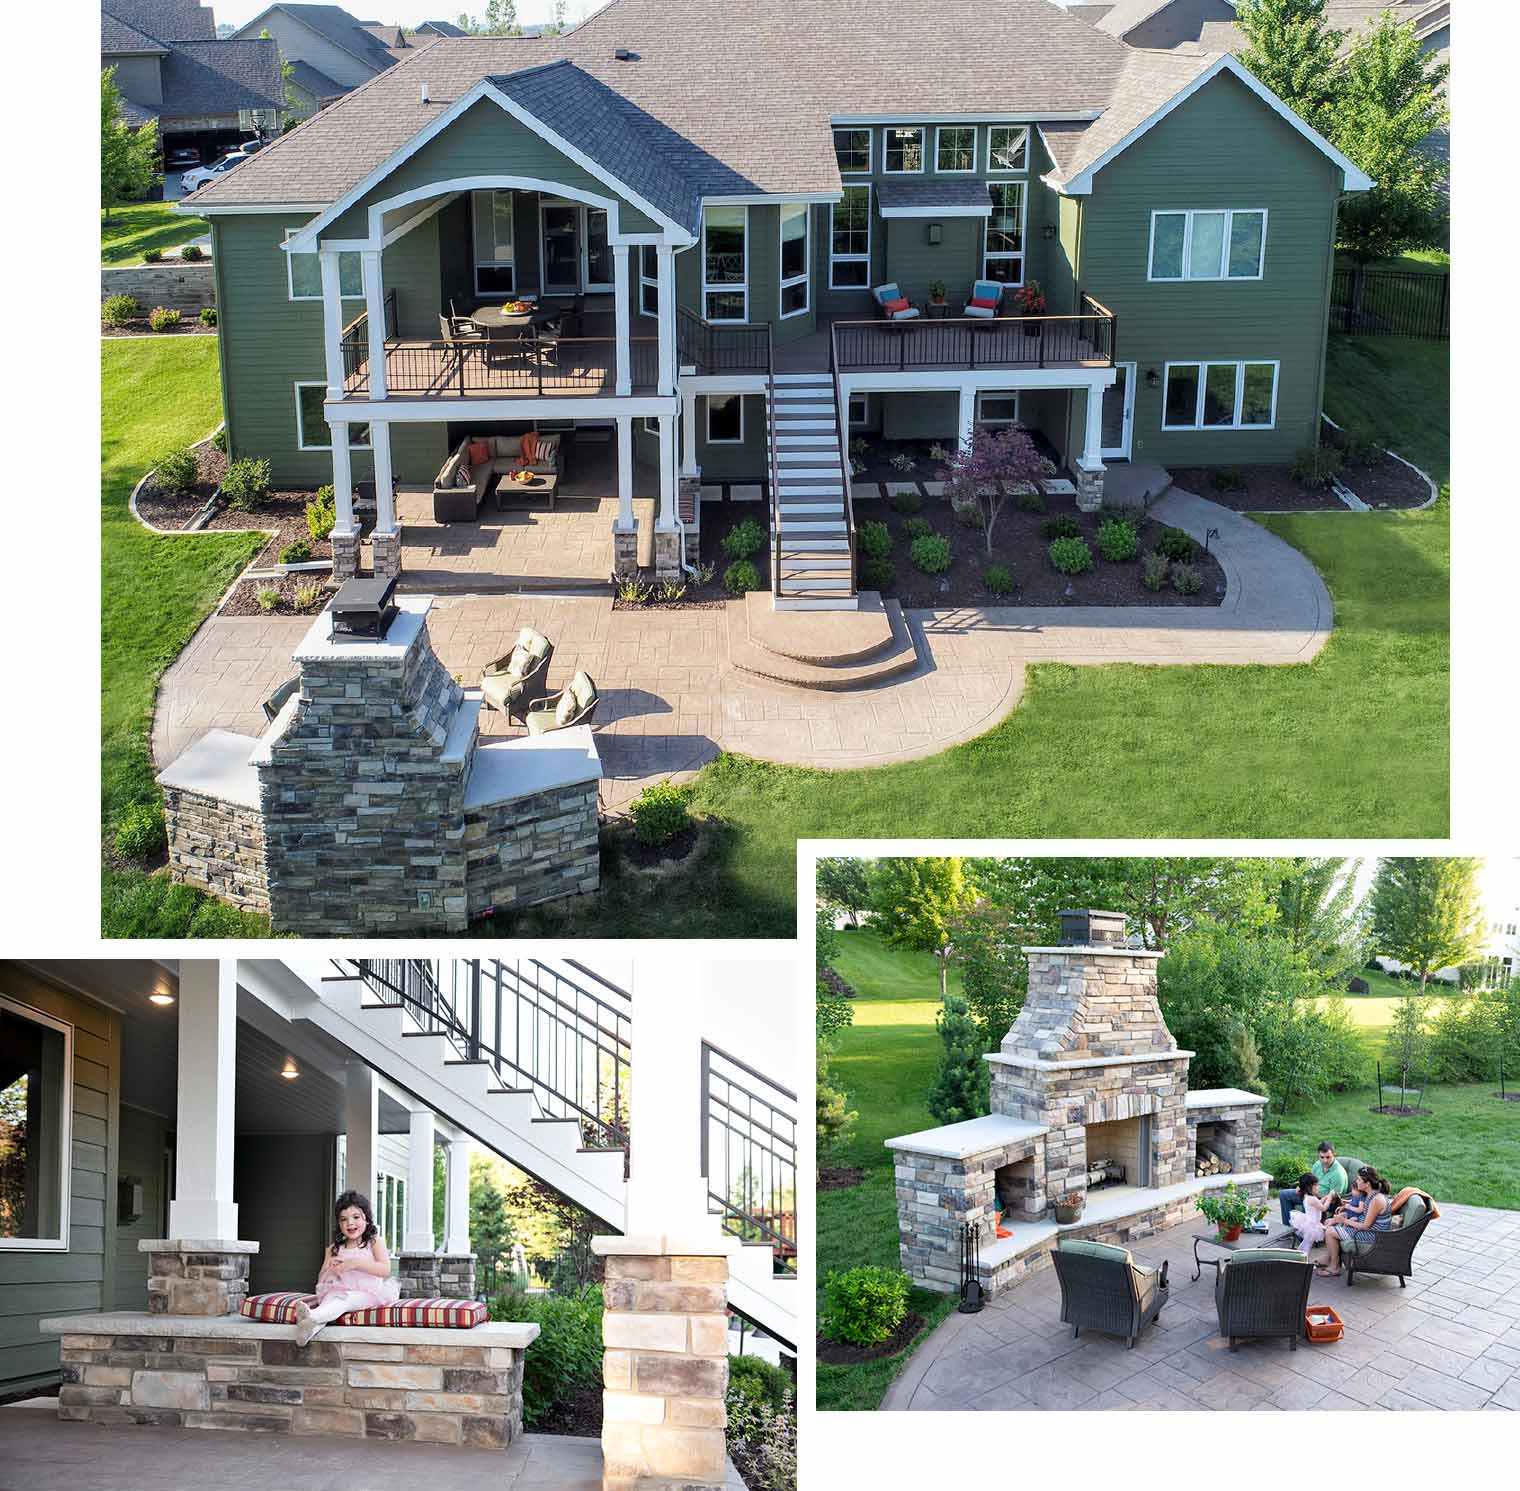 Urbandale covered deck with grand staircase, covered patio and stone fireplace by deck builders Silent Rivers